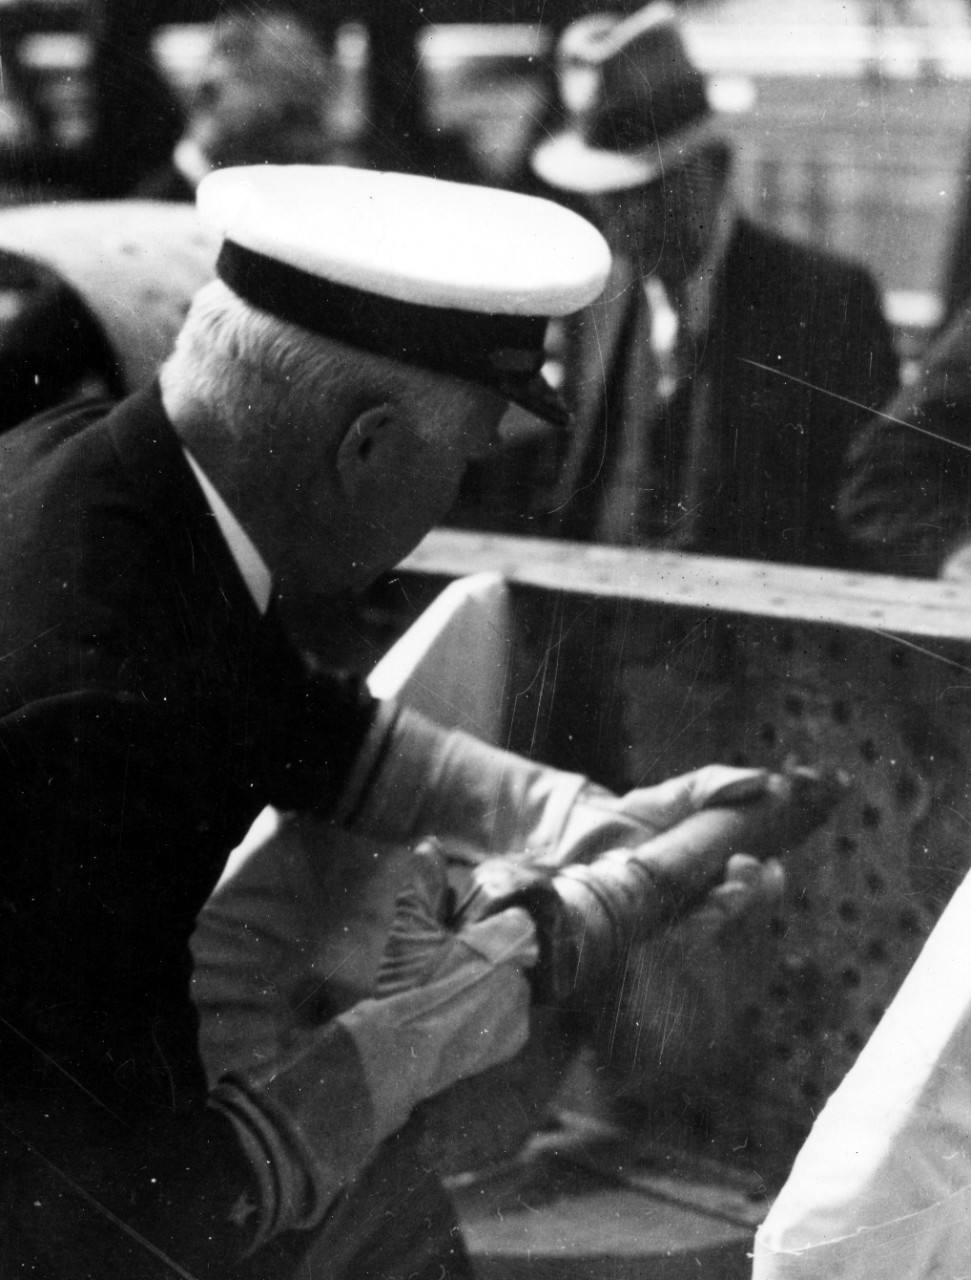 Rear Adm. Wat T. Cluverius, Commandant of the Philadelphia Navy Yard, drives the first rivet in Rhind’s keel on 22 September 1937. (U.S. Navy Bureau of Ships Photograph, RG-19-LCM, Box 407, National Archives and Records Administration, Still Pictures Division, College Park, Md.)